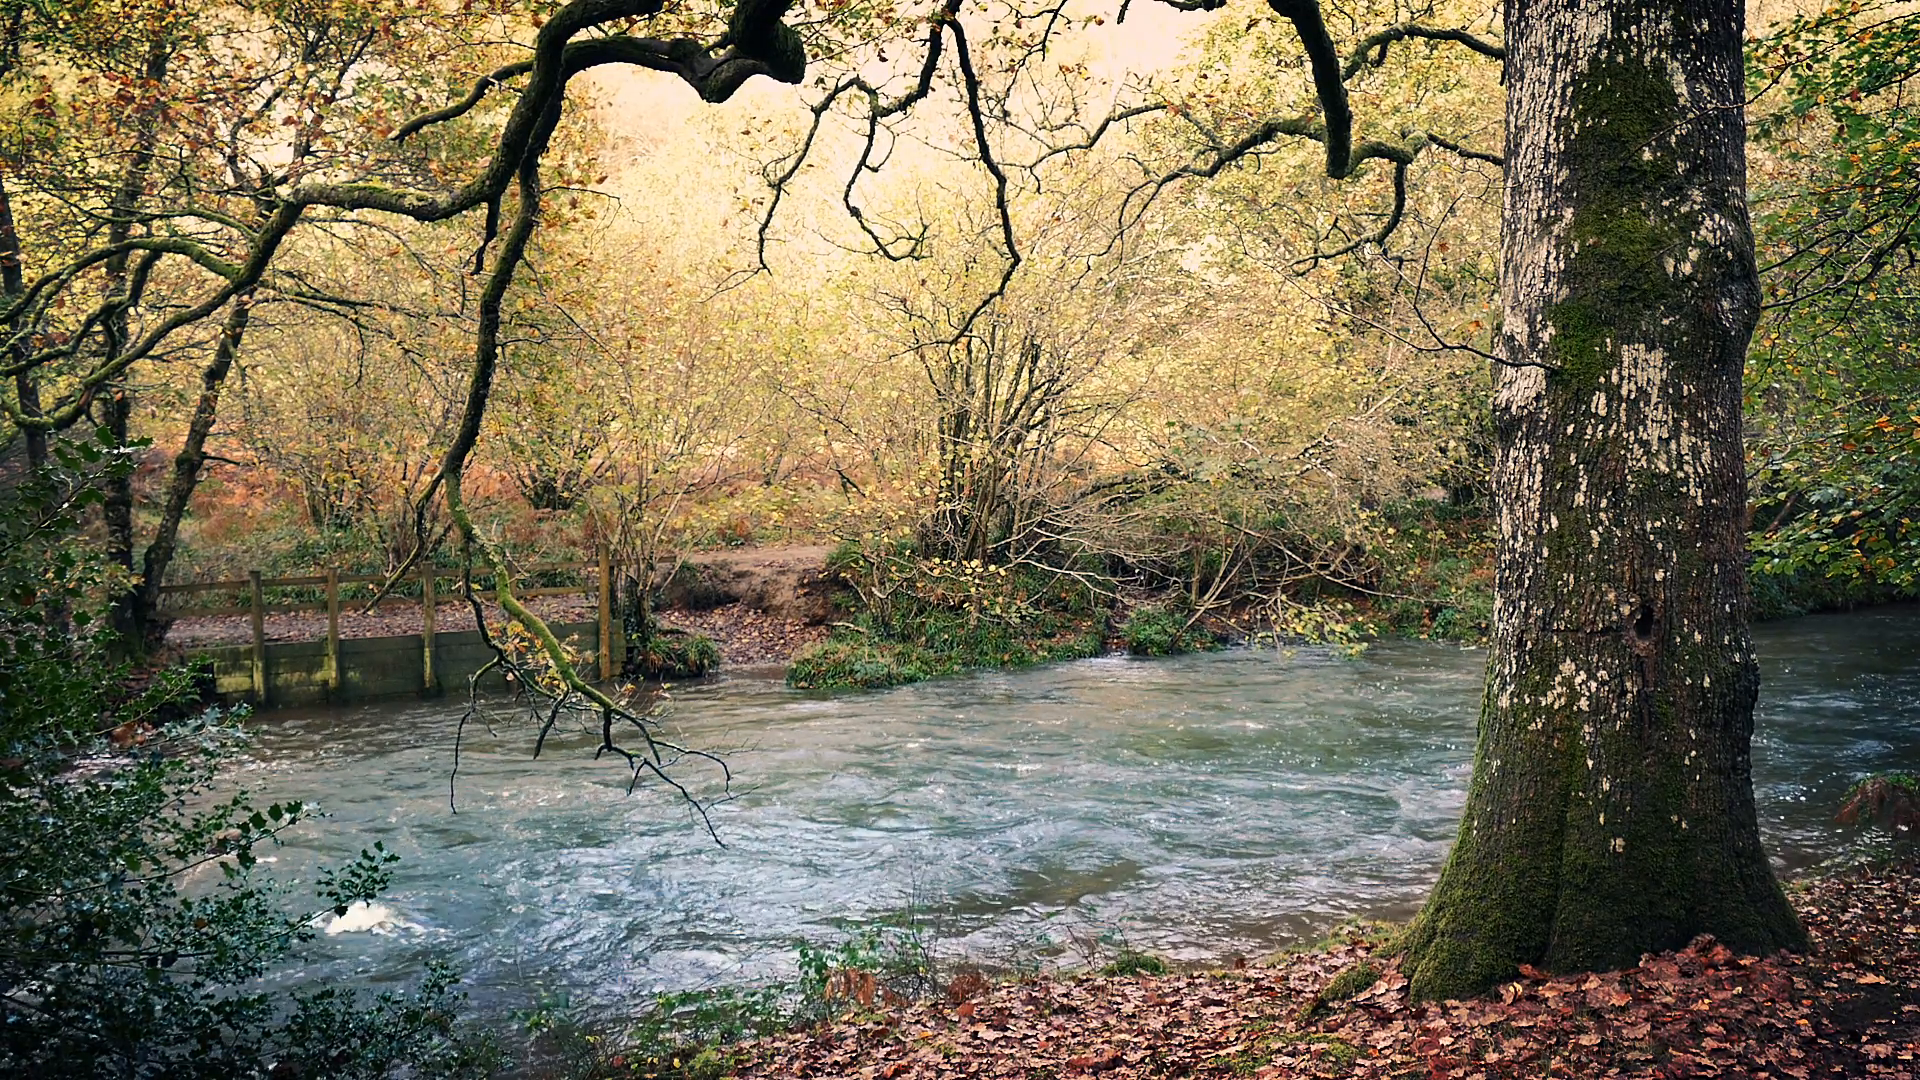 Tranquil River In The Woods Stock Video Footage - Videoblocks